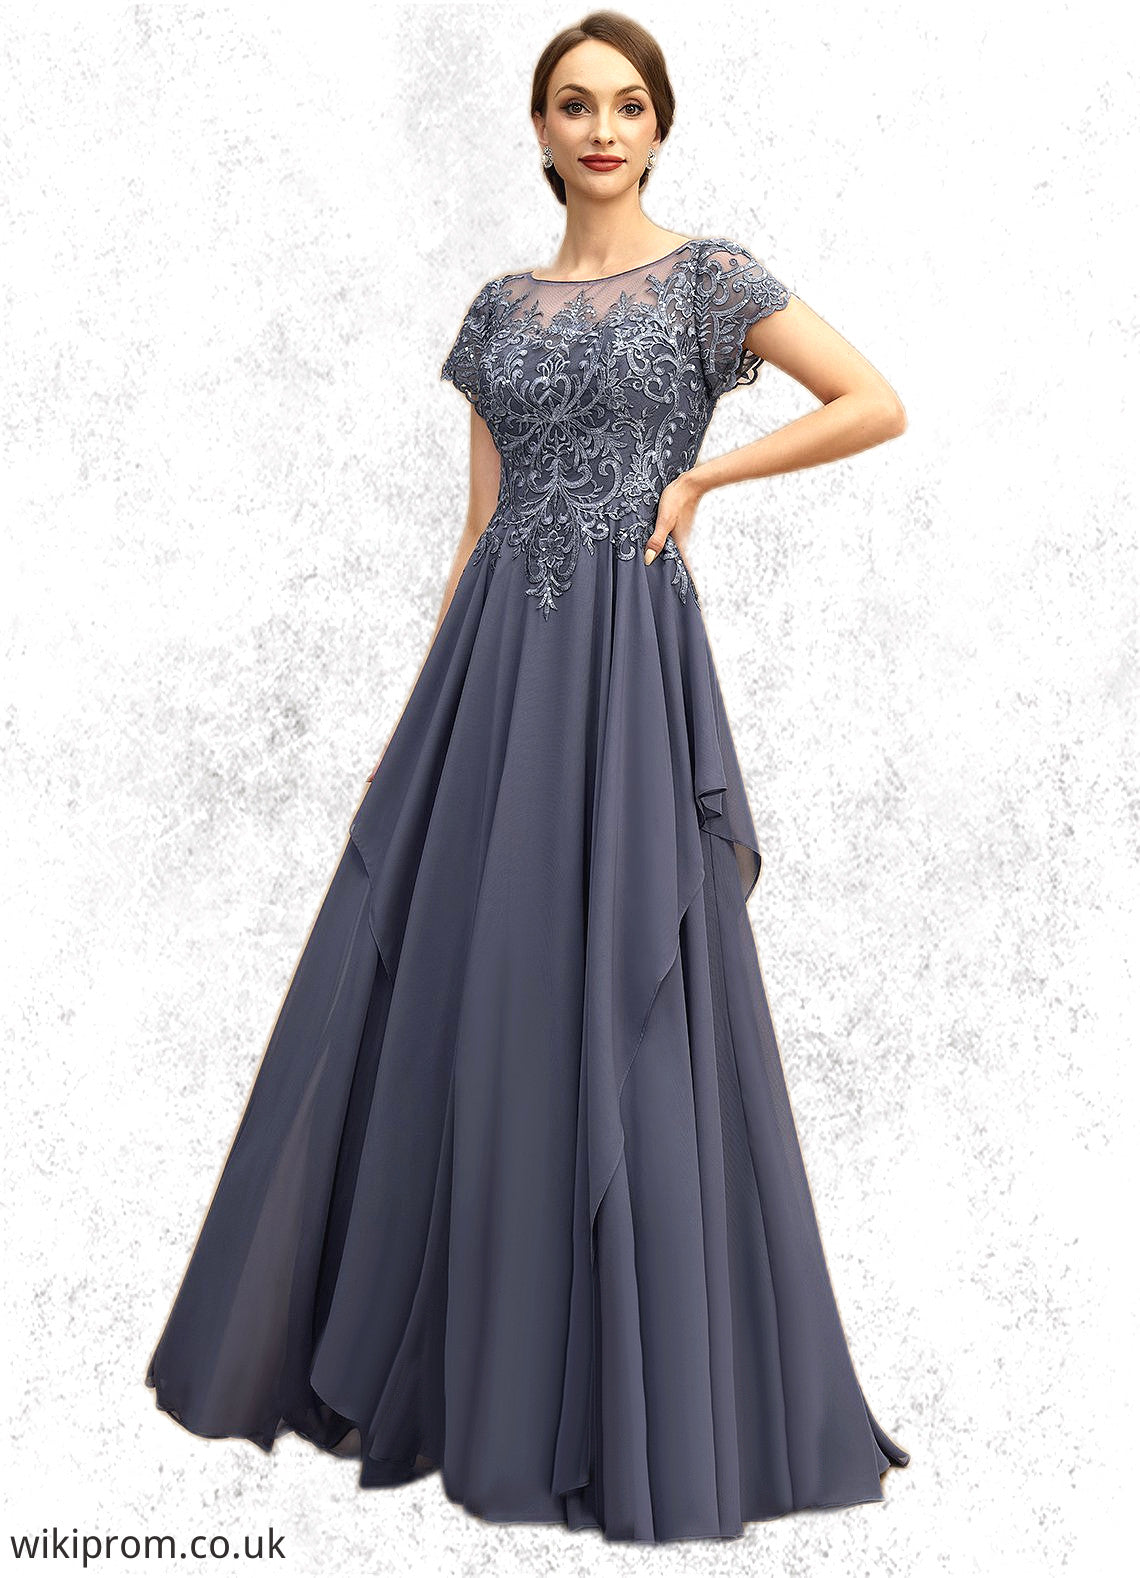 Pam A-line Scoop Illusion Floor-Length Chiffon Lace Mother of the Bride Dress With Cascading Ruffles Sequins SWK126P0021897